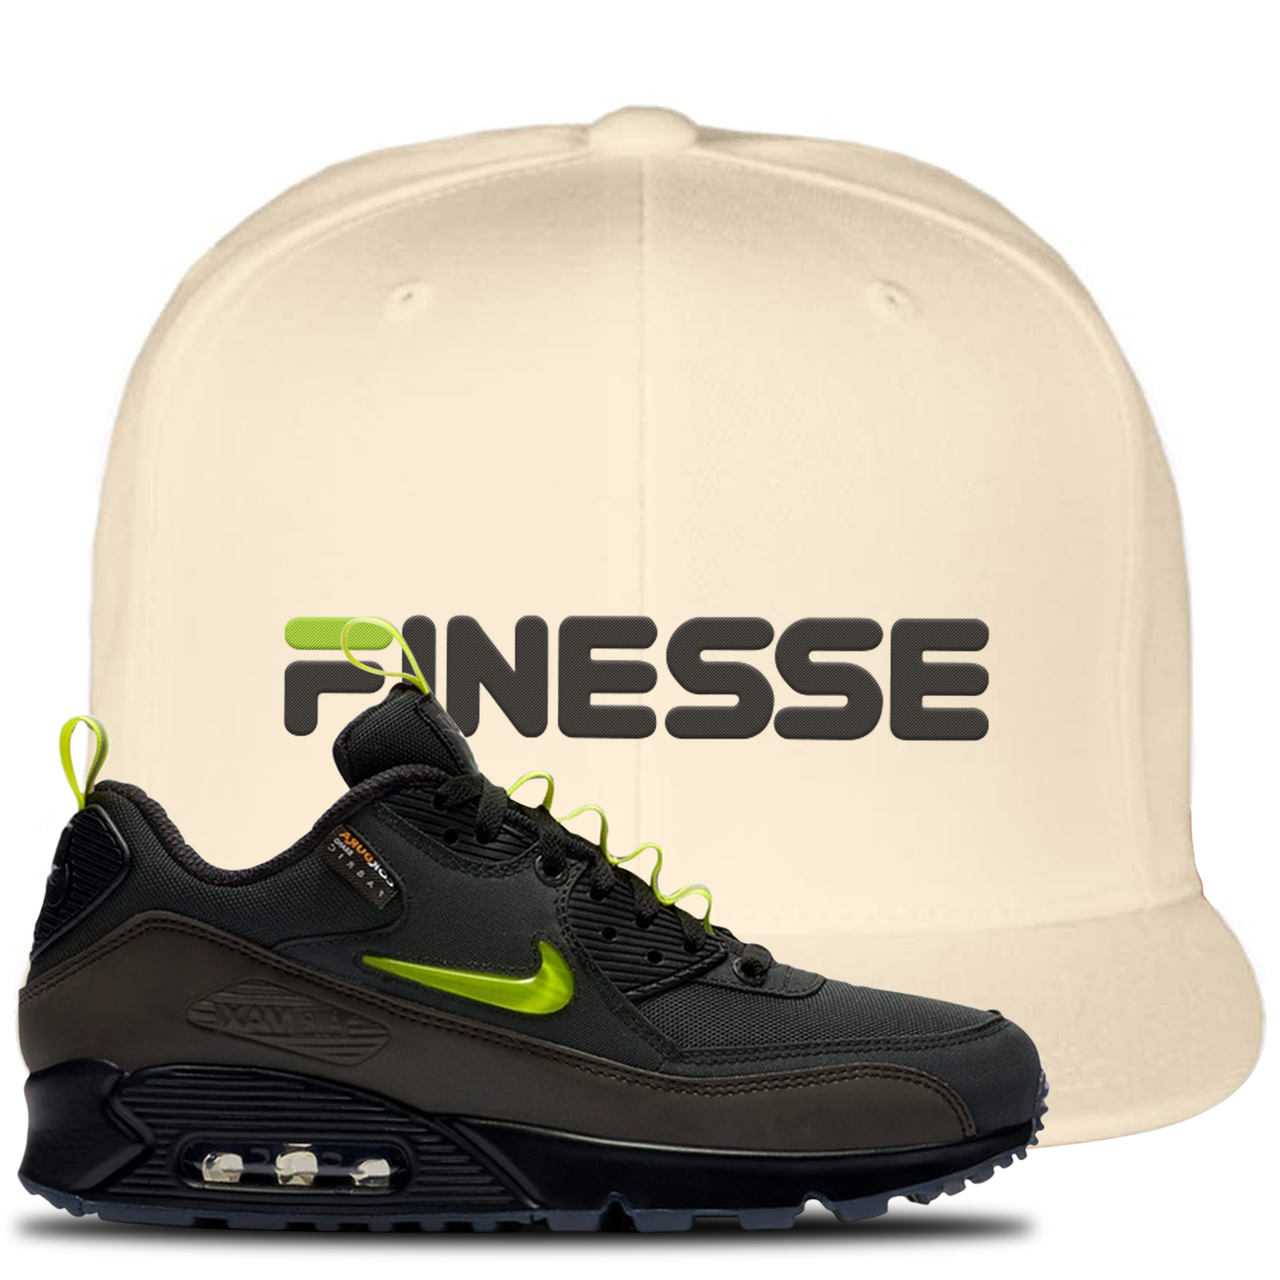 The Basement X Air Max 90 Manchester Finesse White Sneaker Hook Up Snapback Hat